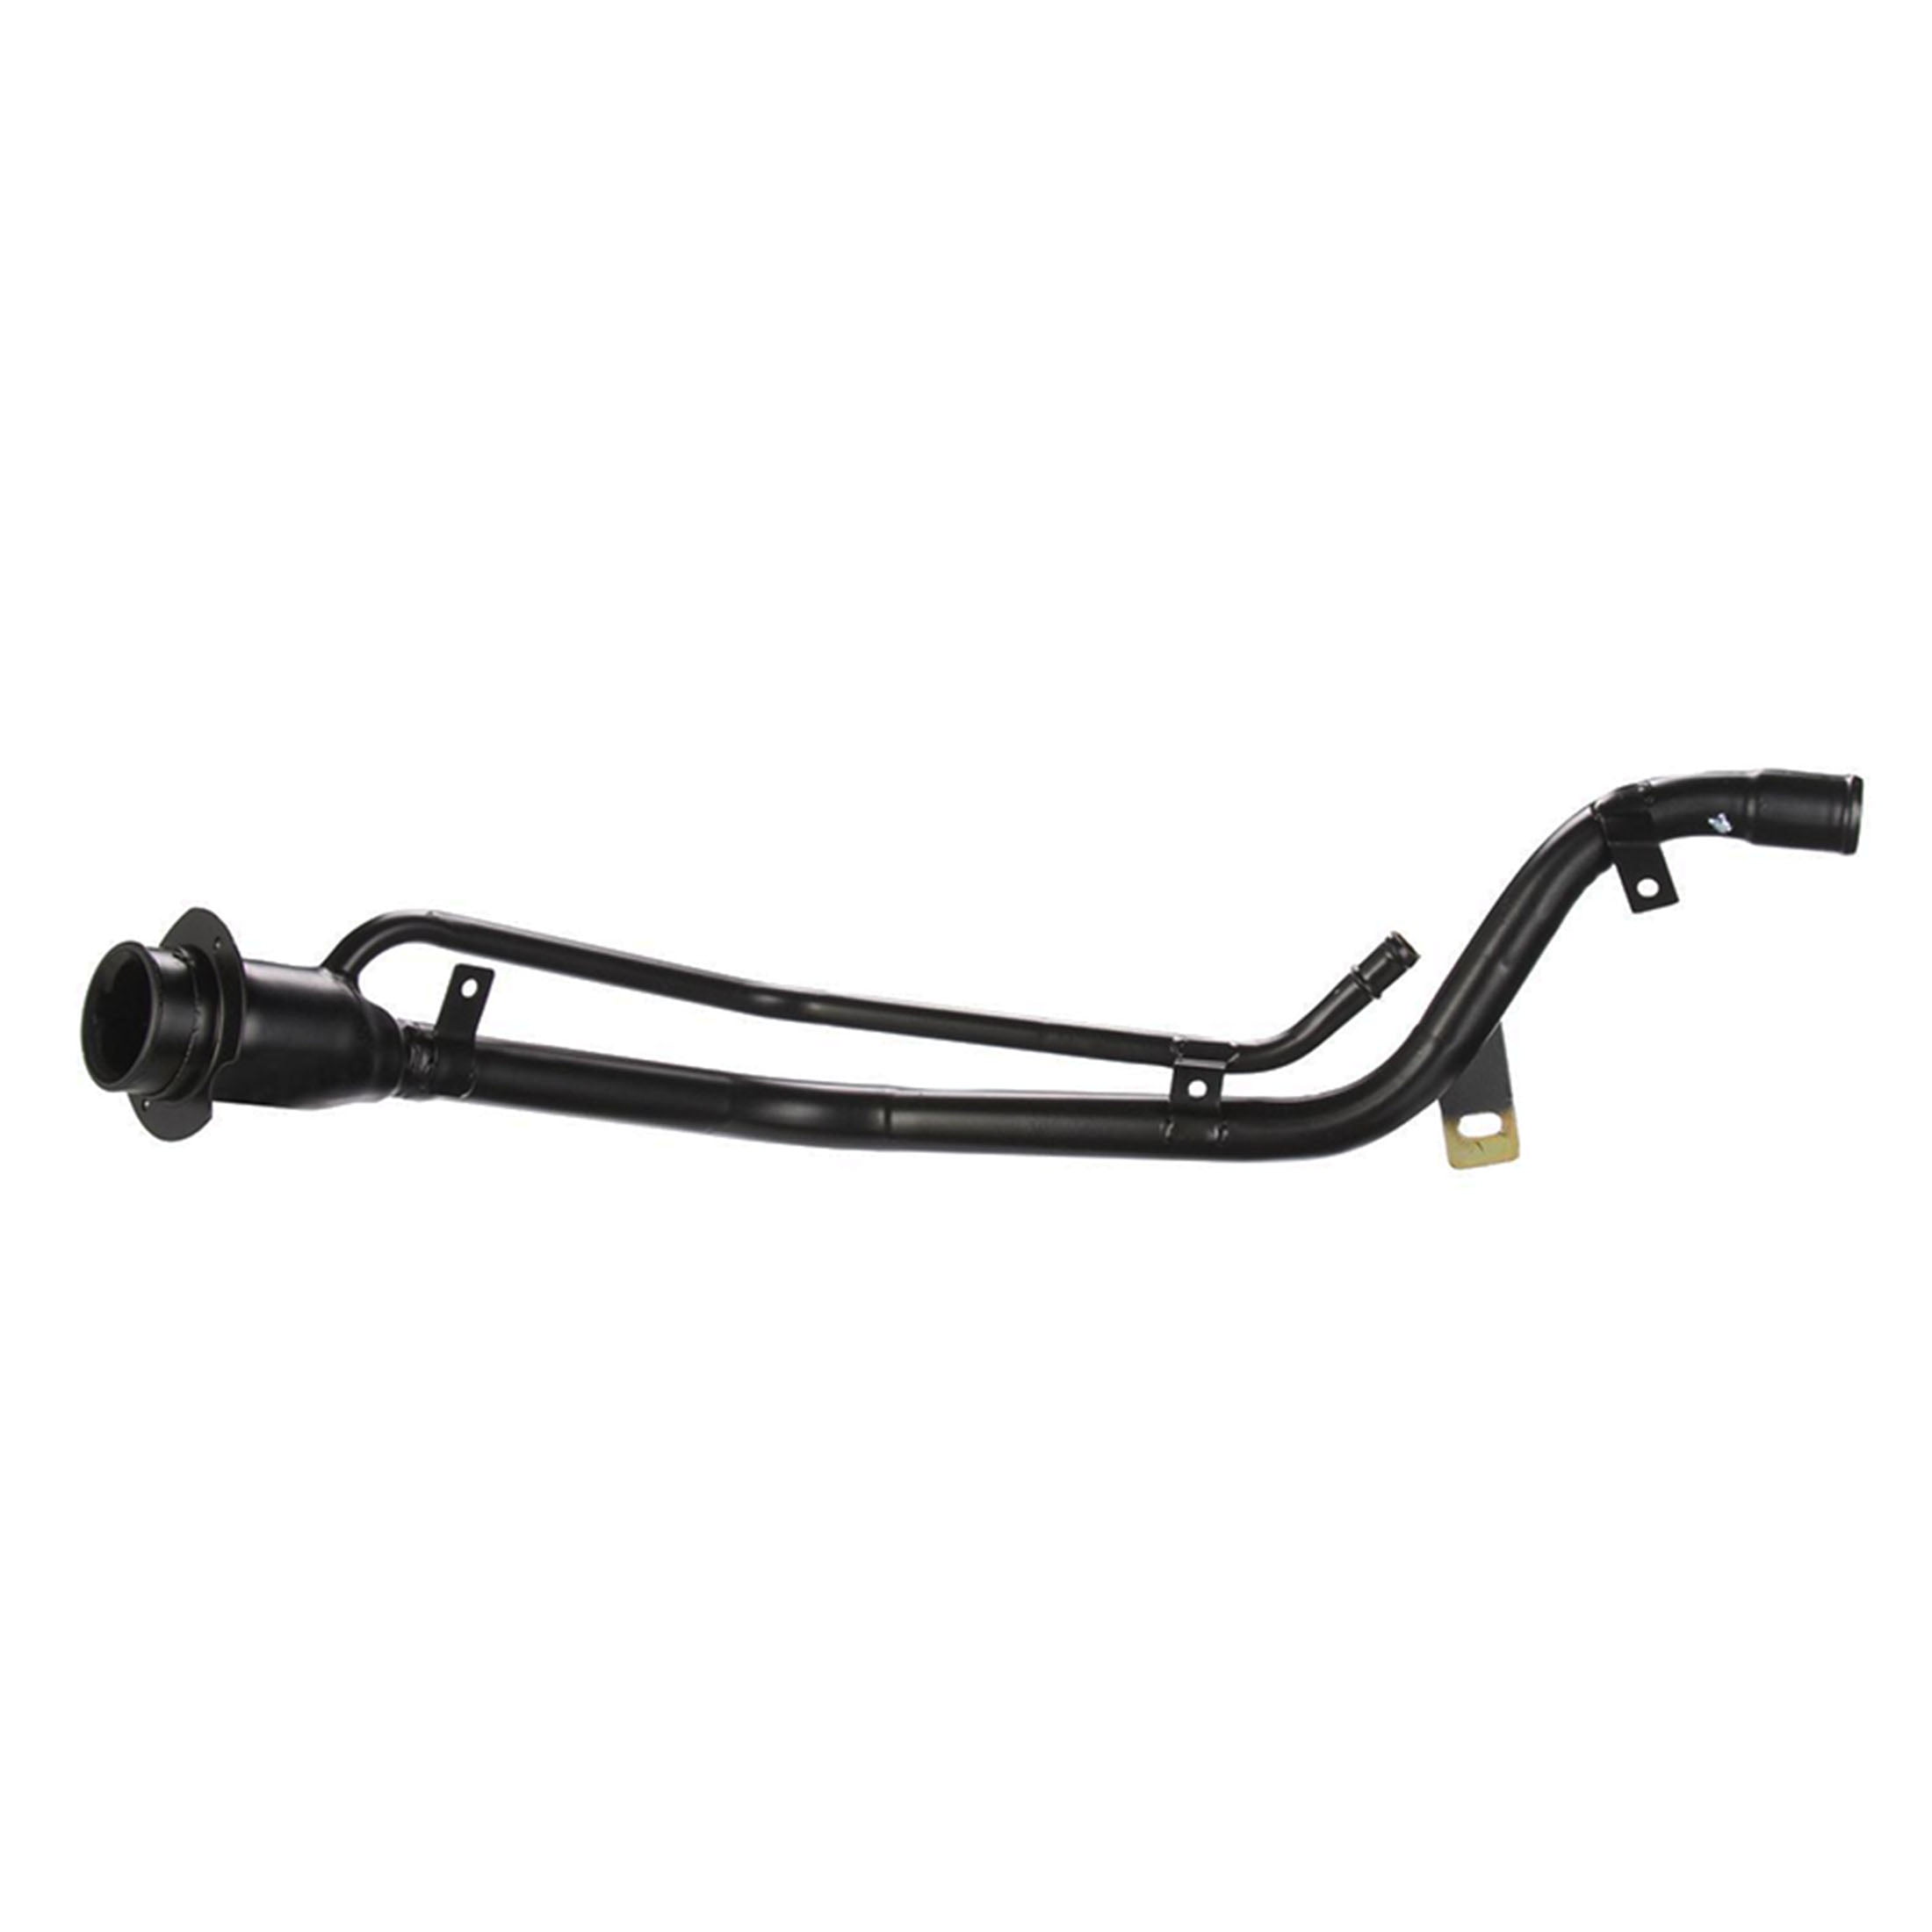 Agility Auto Parts 4063150 Fuel Tank Filler Neck for Mazda Specific Models  